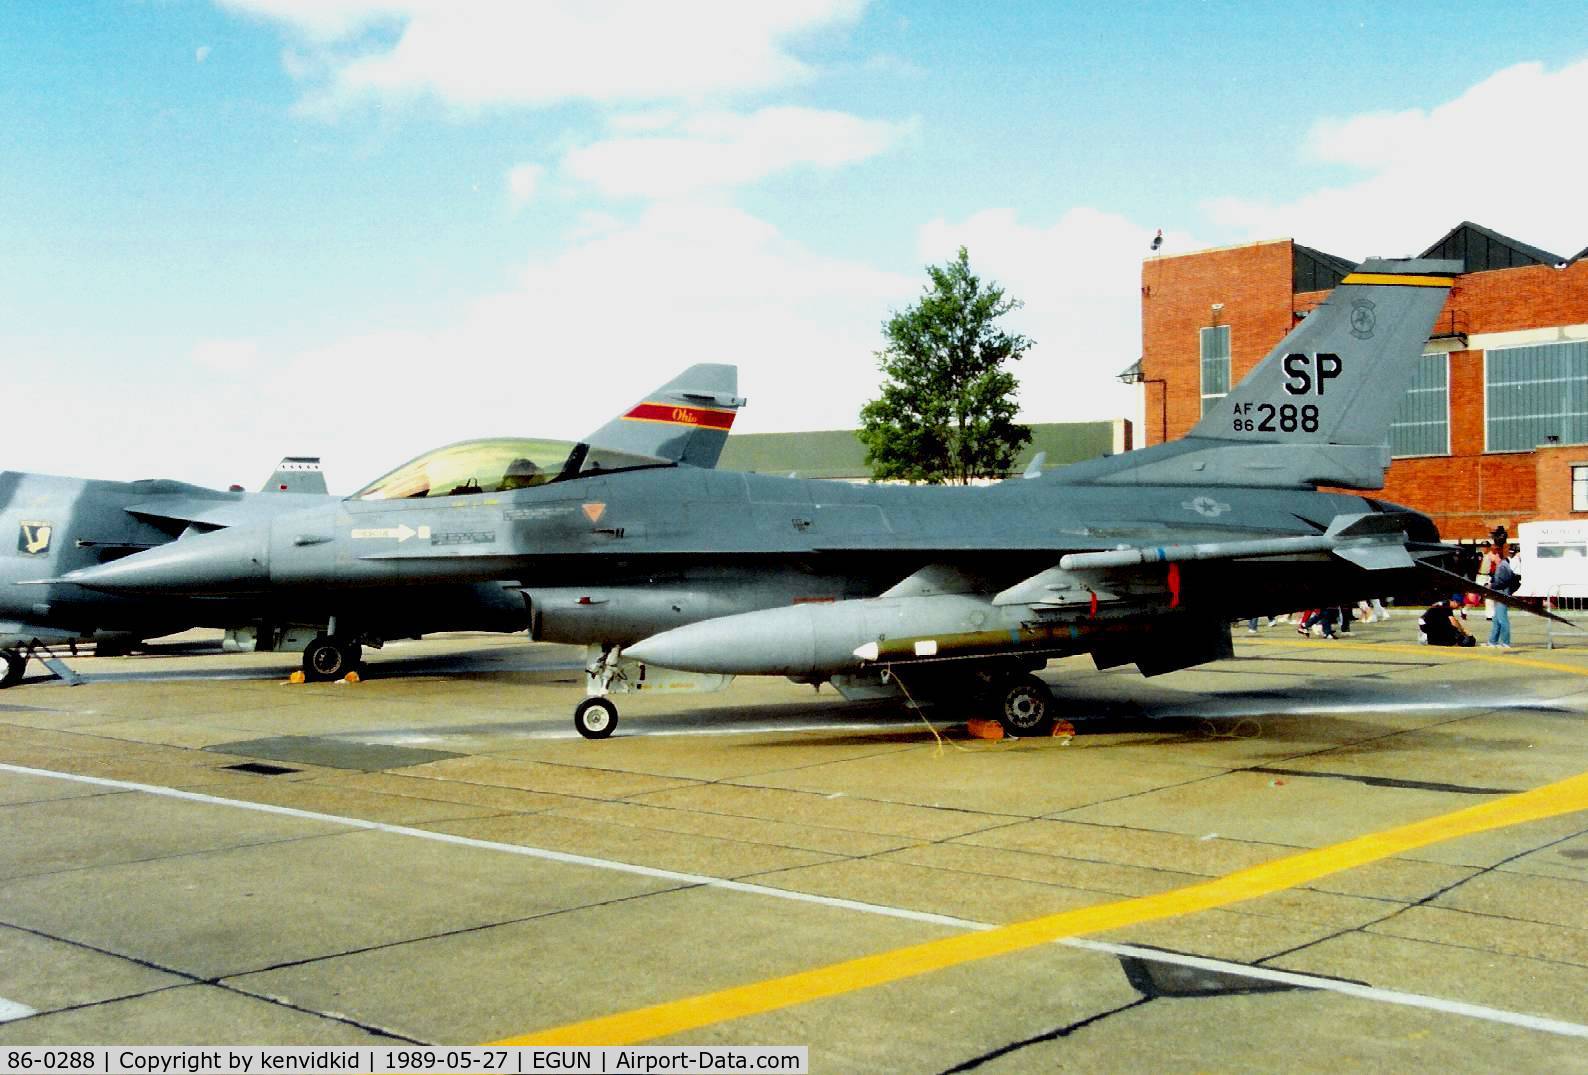 86-0288, 1986 General Dynamics F-16C Fighting Falcon C/N 5C-394, At the 1989 Mildenhall Air Fete.